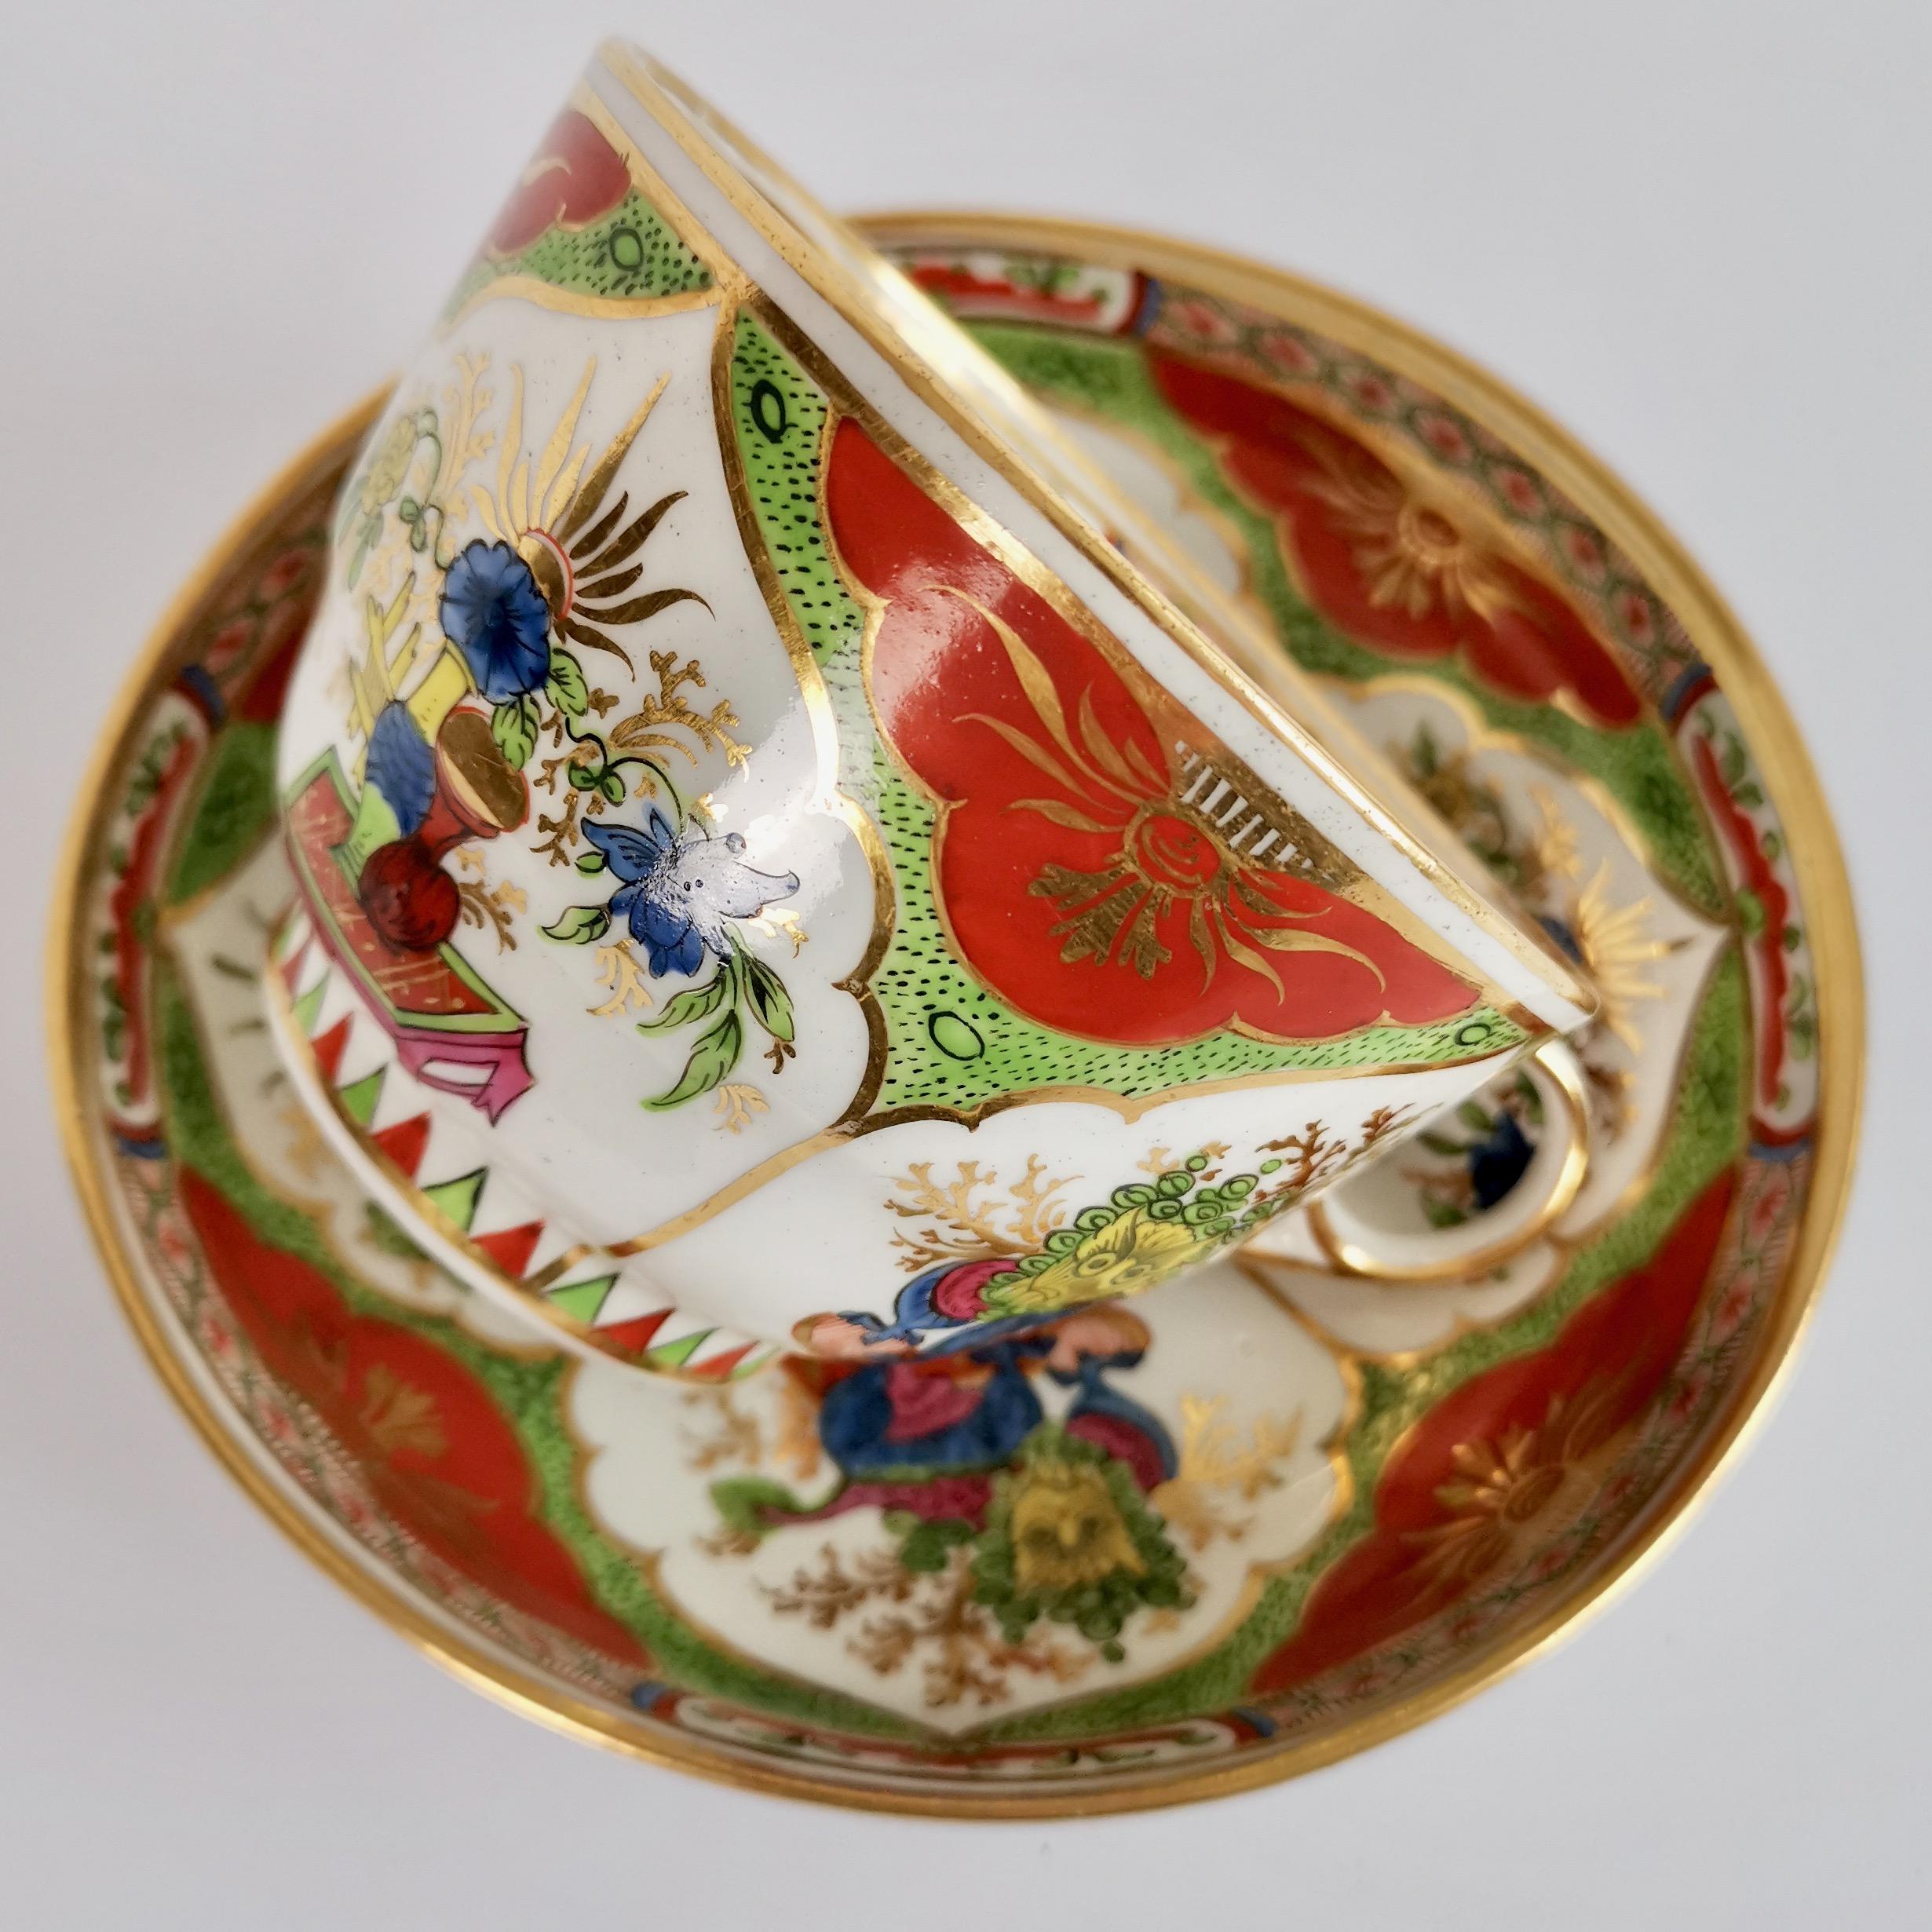 Hand-Painted Chamberlains Worcester Porcelain Breakfast Cup, Dragons in Compartments, Ca 1800